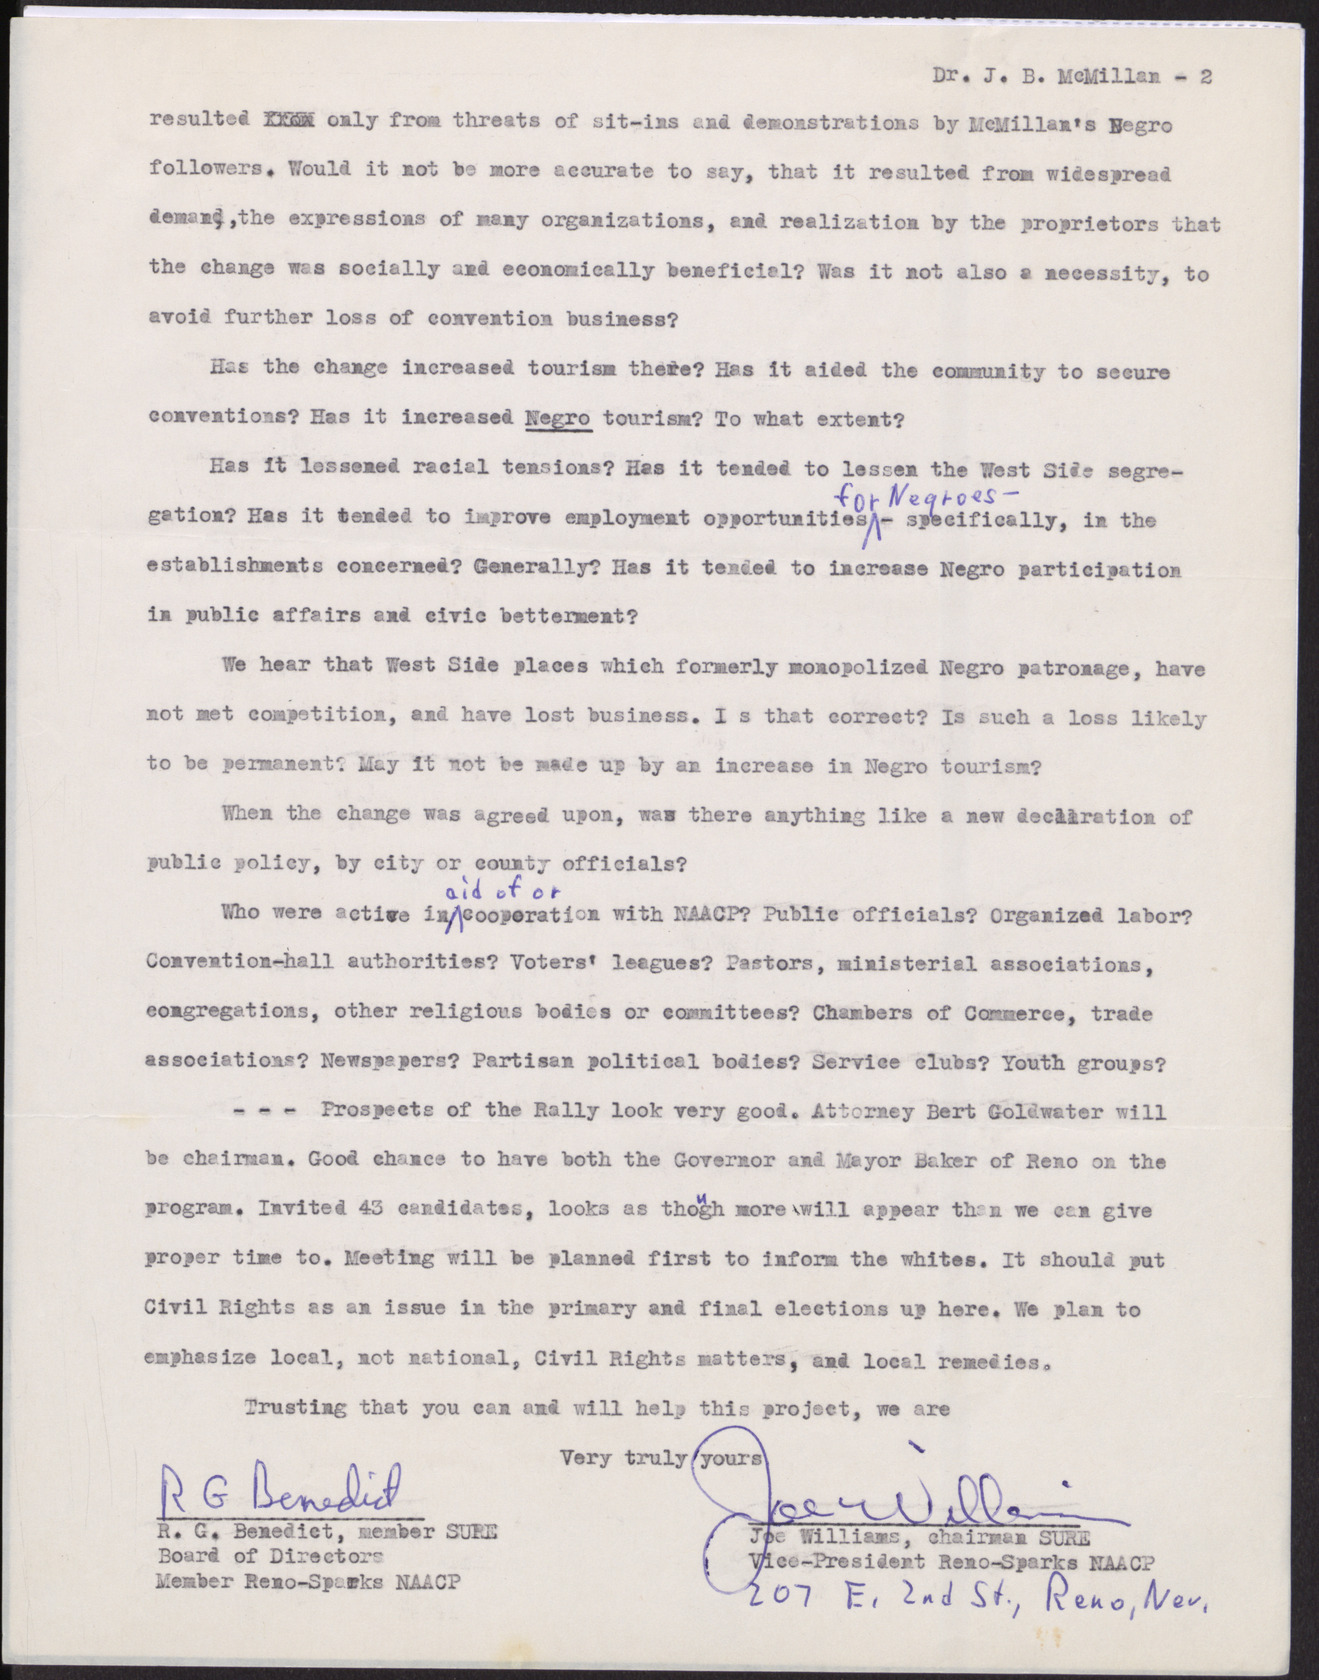 Letter to Dr. J. B. McMillan from R. G. Benedict and Joe Williams (2 pages) August 8, 1960, Page 2